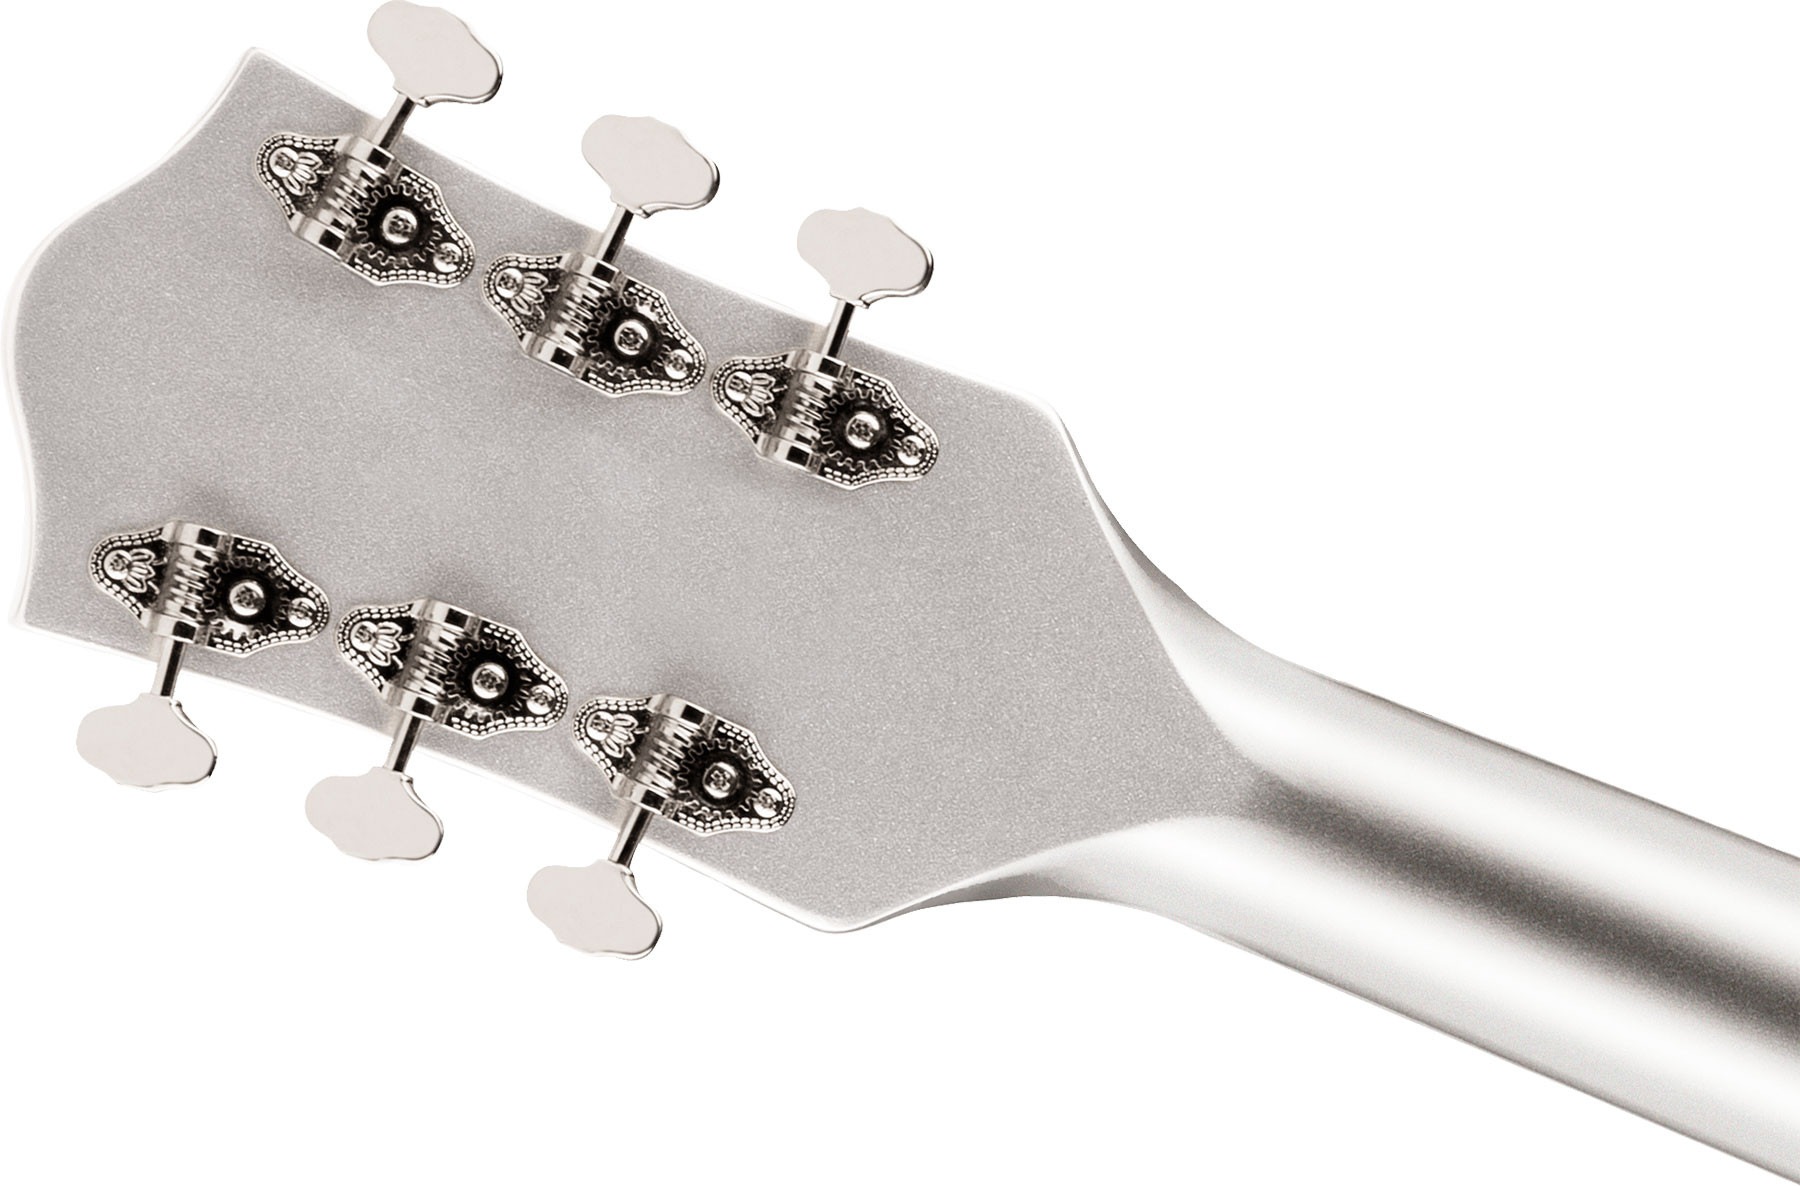 Gretsch G5420t Classic Electromatic Hollow Body Hh Trem Bigsby Lau - Airline Silver - Semi-Hollow E-Gitarre - Variation 3